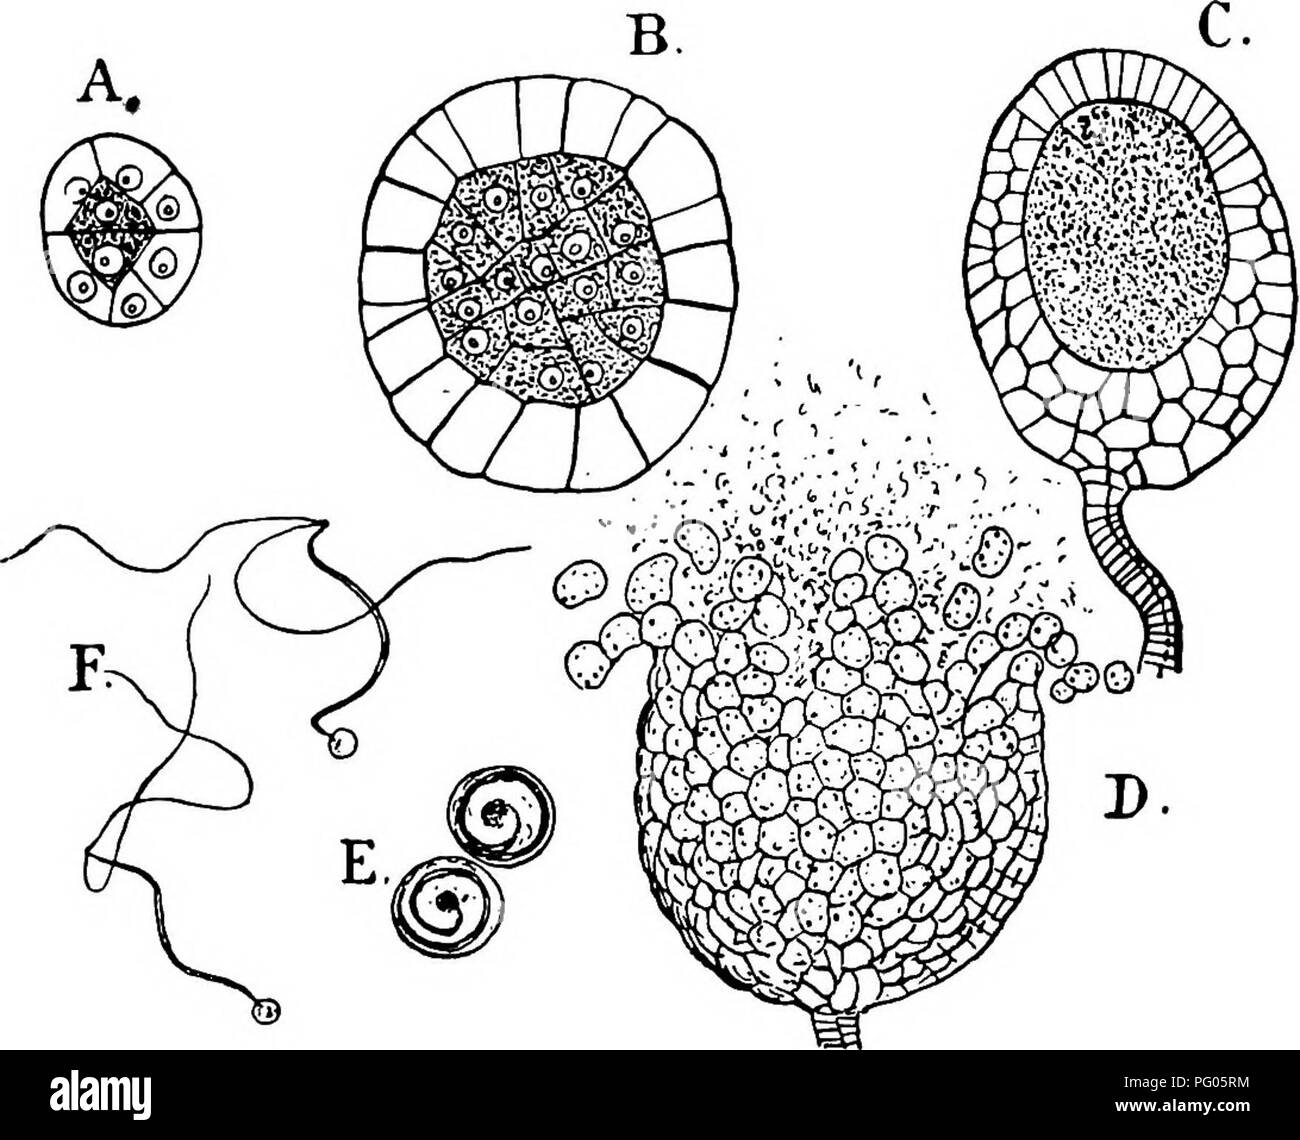 . The structure and development of mosses and ferns (Archegoniatae). Plant morphology; Mosses; Ferns. io6 MOSSES AND FERNS &quot; CHAP. tion (Fig. 53, A), which separate a central cell, nearly tetra- hedral in form, from two outer cells. In the complete separa- tion of the central cell by these first two walls, Porella appears to dififer from the other Jungermanniaceae examined, (Leitgeb (7), ii., p. 44), where these first two peripheral cells do not reach to the top of the antheridium, and a third cell is cut off before the separation of the central part of the antheridium from the wall is co Stock Photo